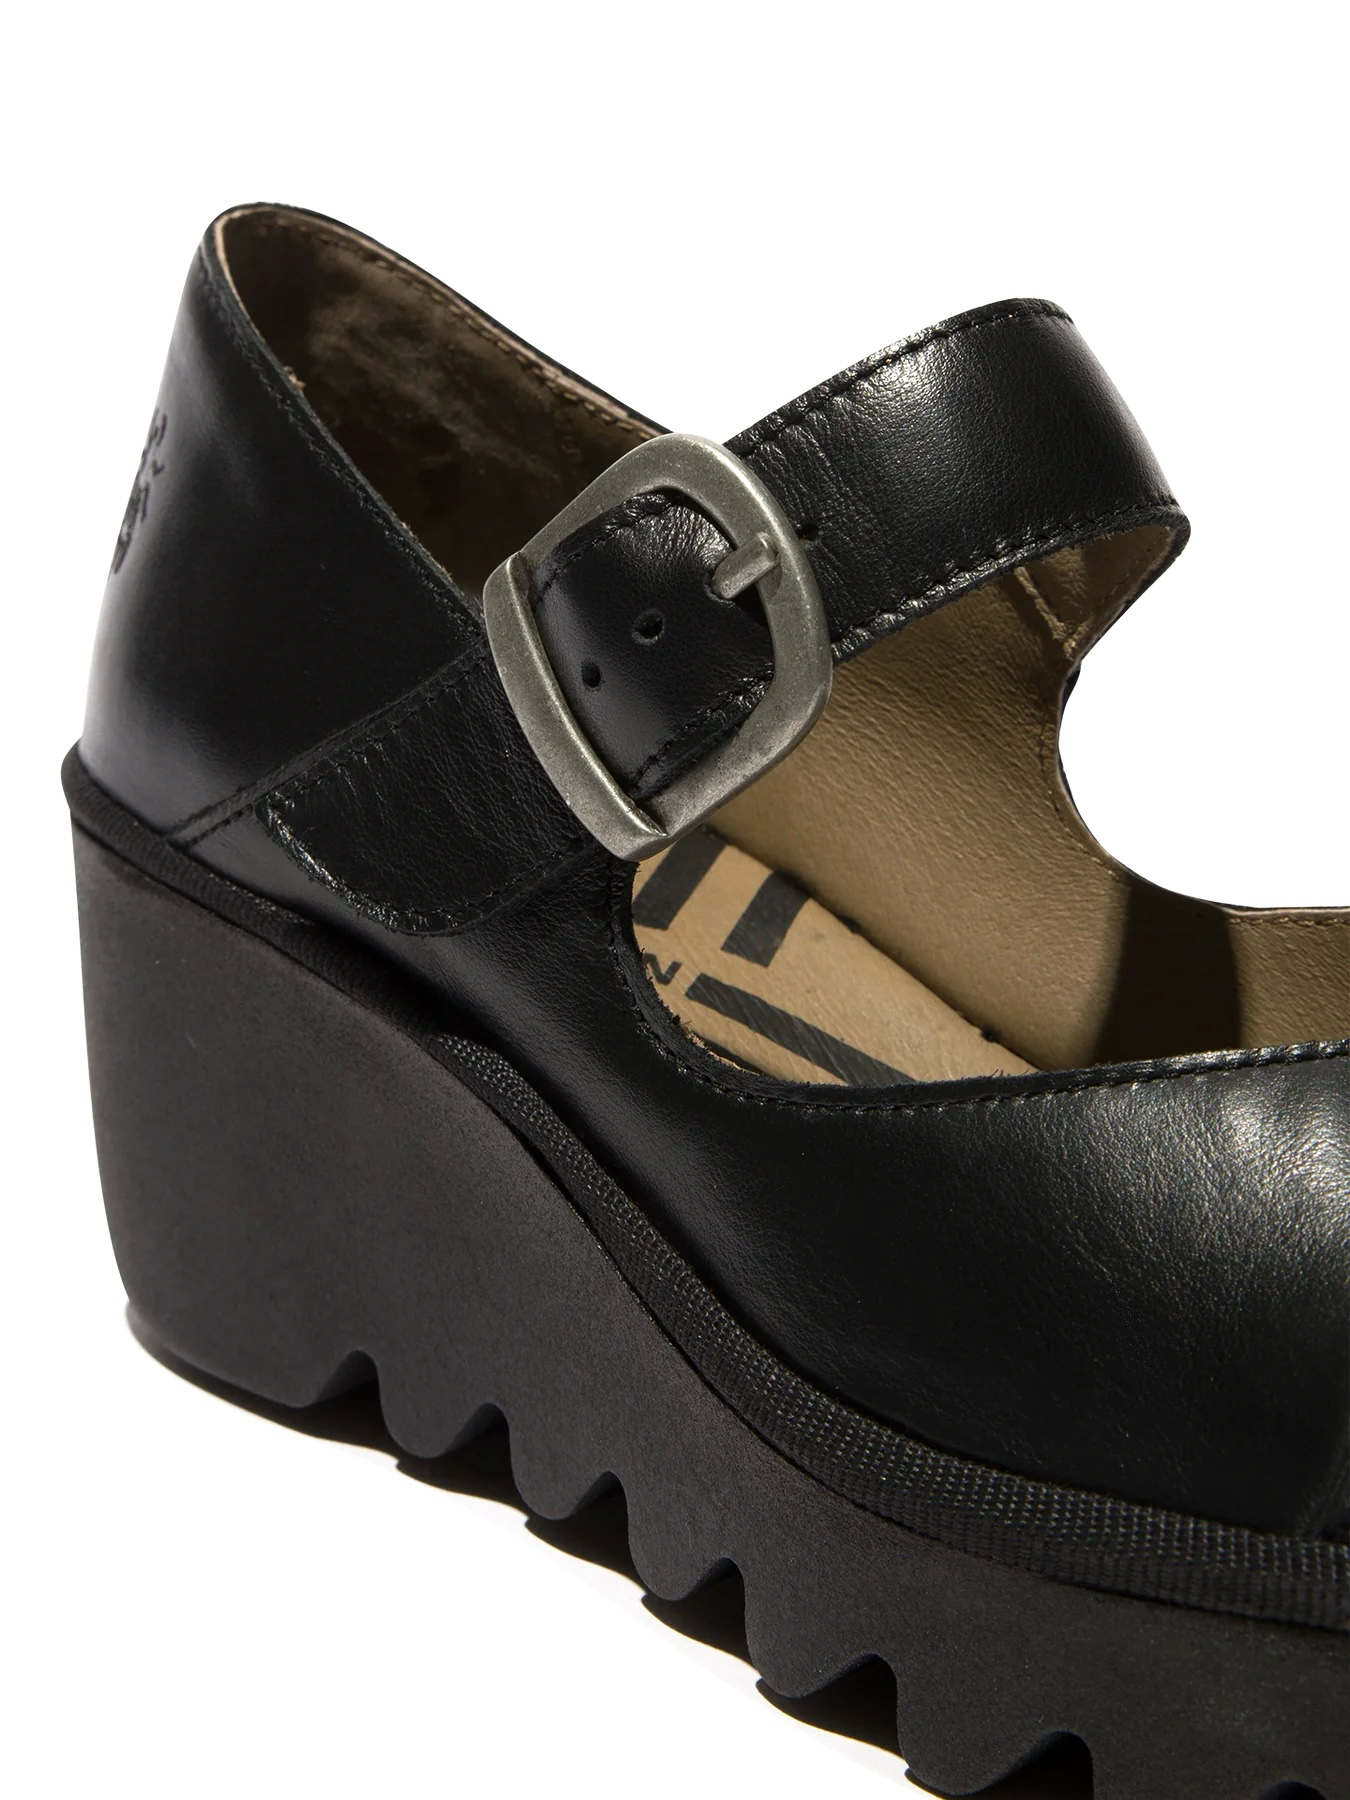 Fly London Baxe428fly Black Naomi Leather Wedges Made In Portugal